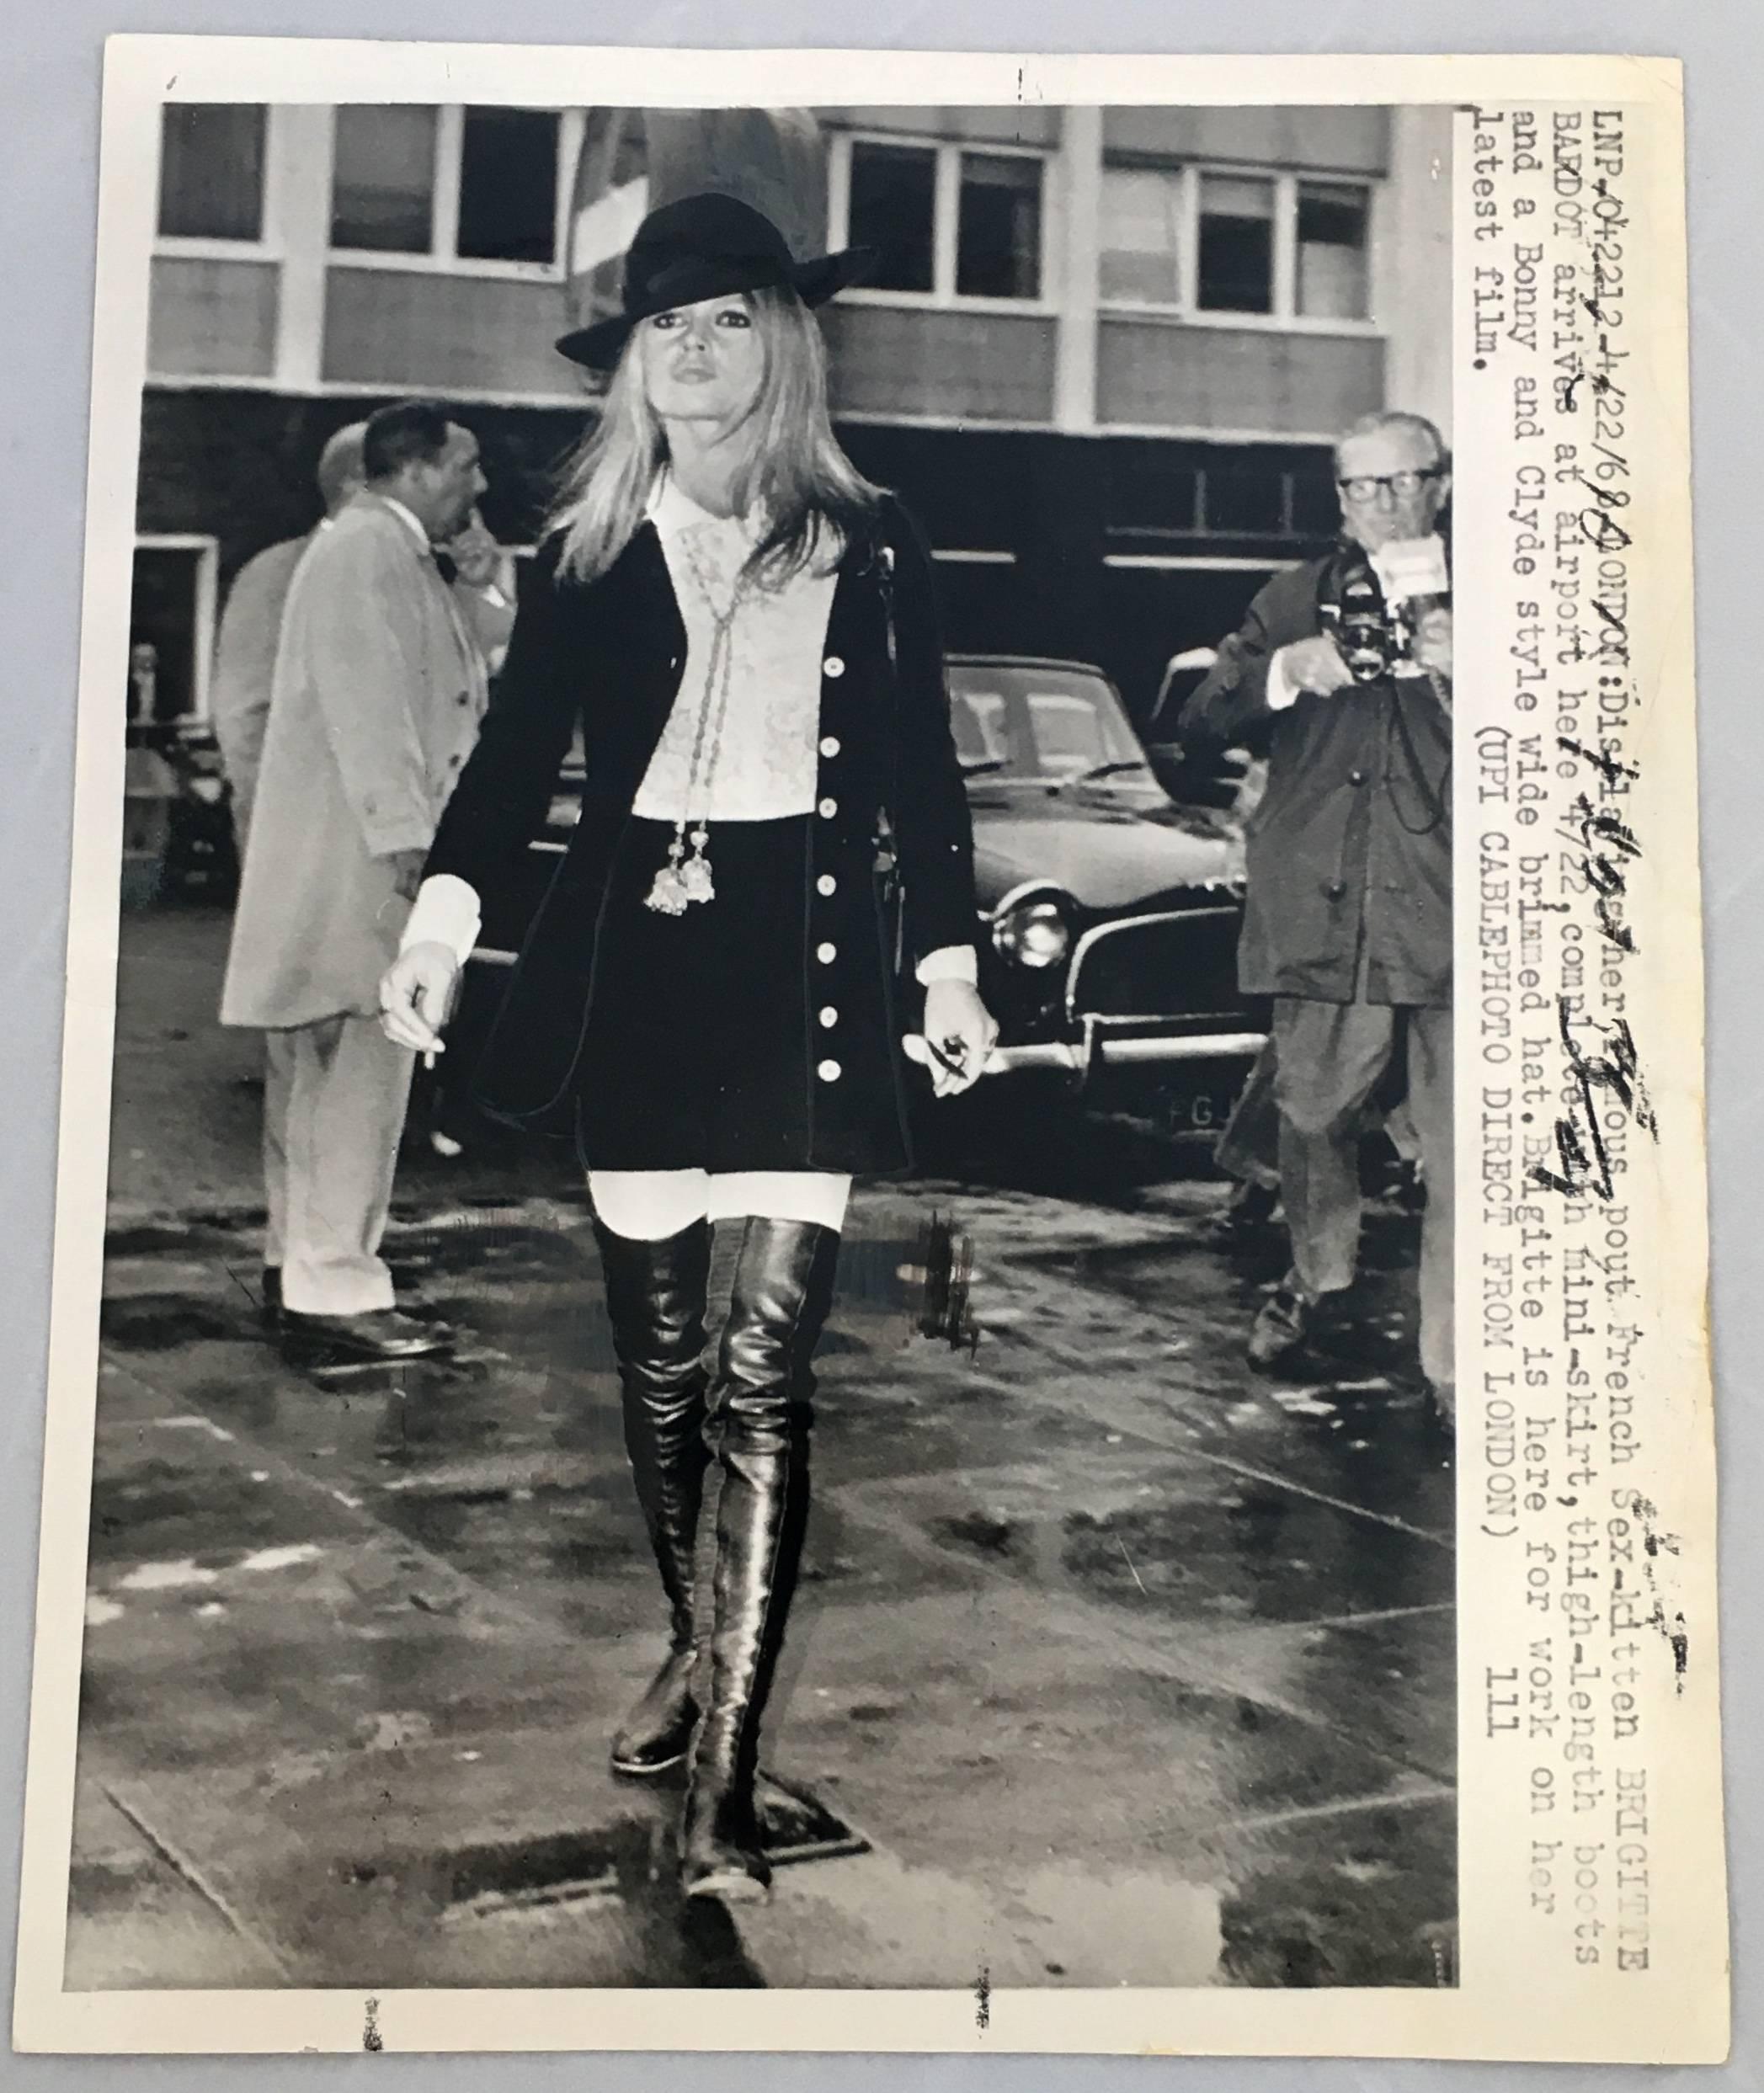 Vintage Brigitte Bardot press photo, circa early 1970s.

Measures: 6 x 9 inches
Good condition.

Related categories:
Jean Luc Godard. French New Wave. Jane Birkin. 
Francoise Hardy. Serge Gainsbourg. Raymond Cauchetier.